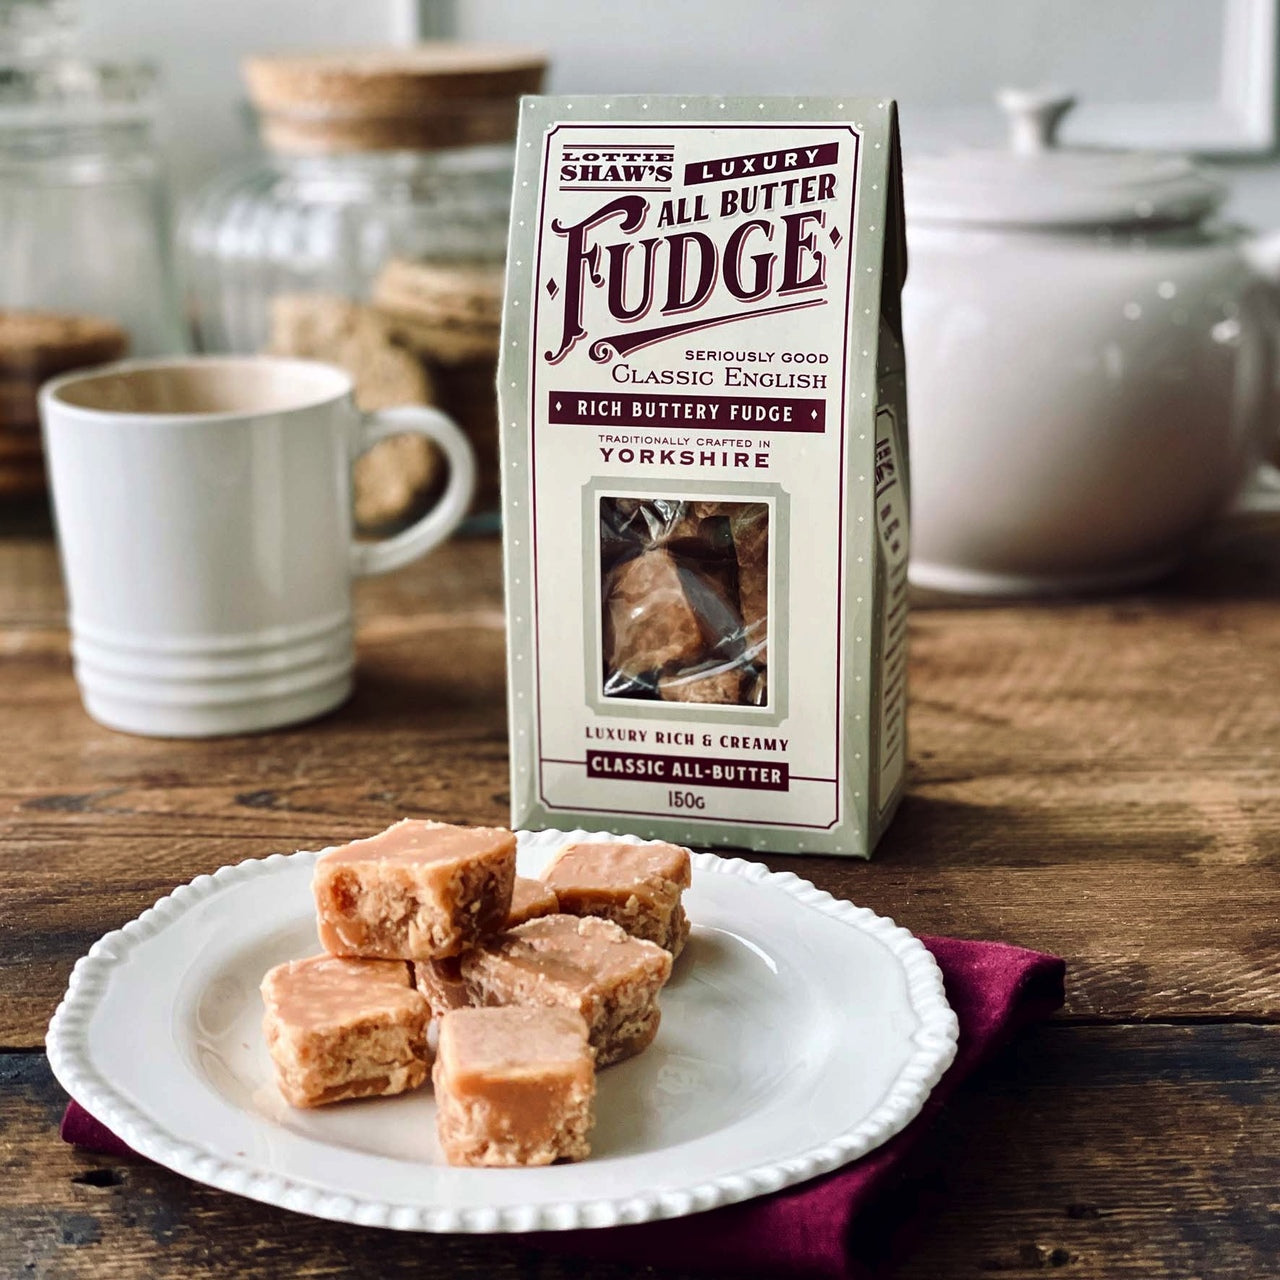 Packet of Lottie Shaw's luxury all butter fudge with contents showing through cellophane window. There is some fudge pictured on a plate on a kitchen table.